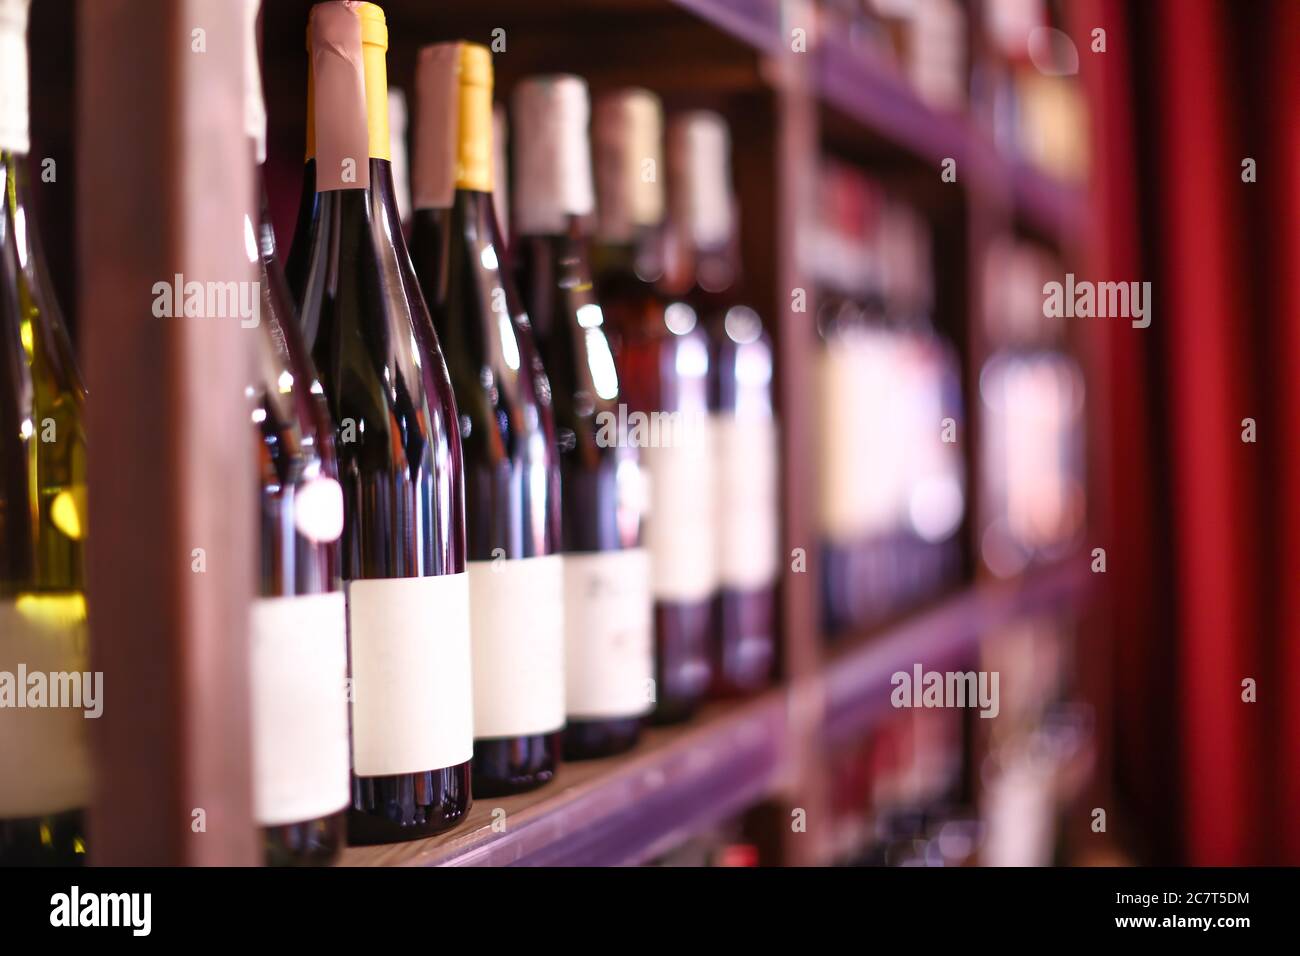 Rack with bottles of wine in store Stock Photo